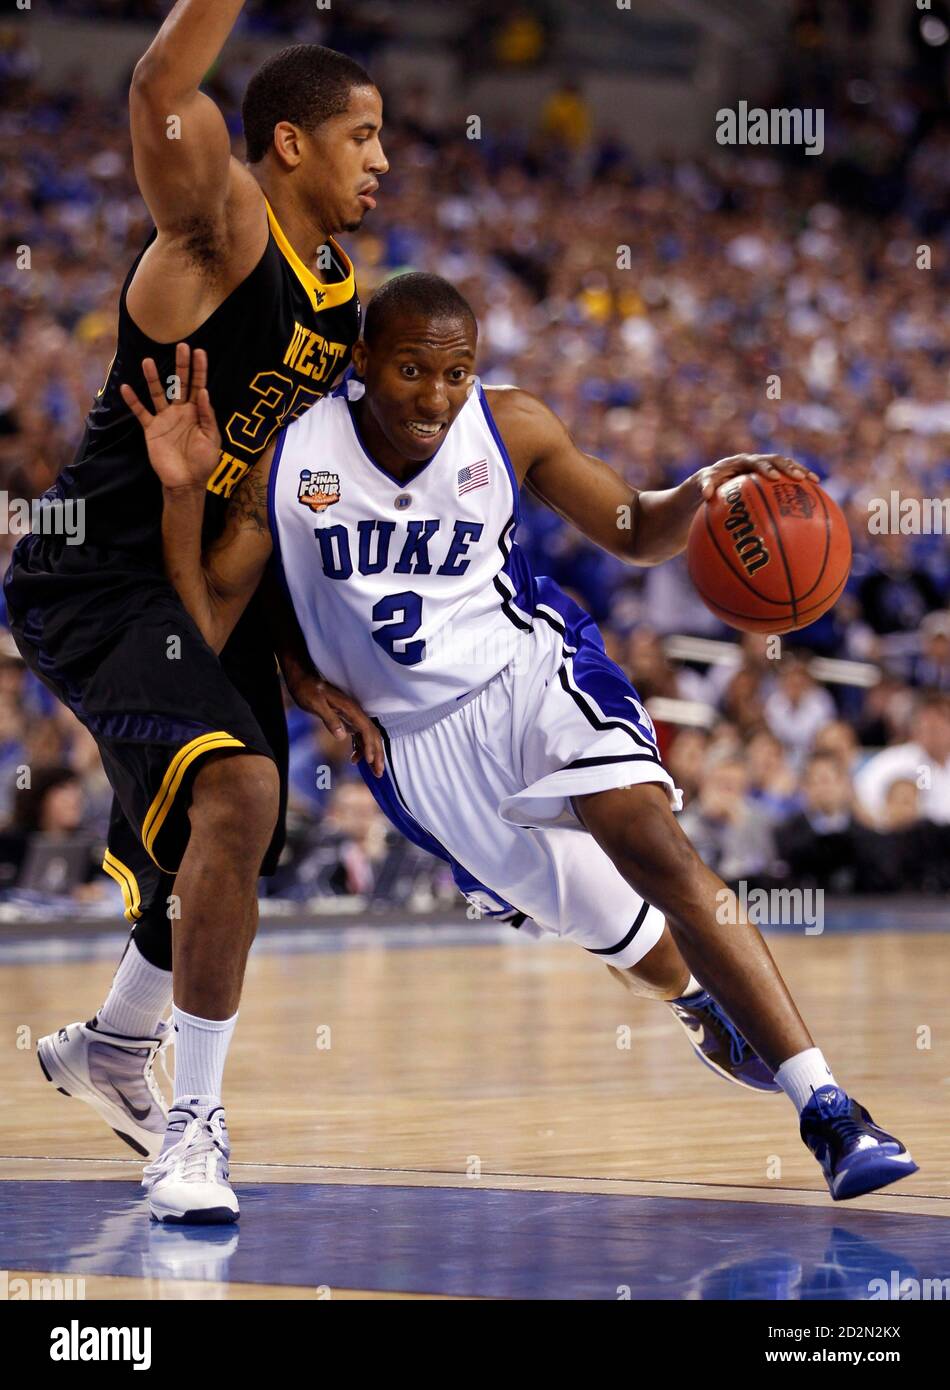 Duke's Nolan Smith (R) drives around West Virginia's Wellington Smith during their NCAA Final Four semi-final college basketball game in Indianapolis, Indiana April 3, 2010.     REUTERS/Jeff Haynes (UNITED STATES - Tags: SPORT BASKETBALL) Stock Photo